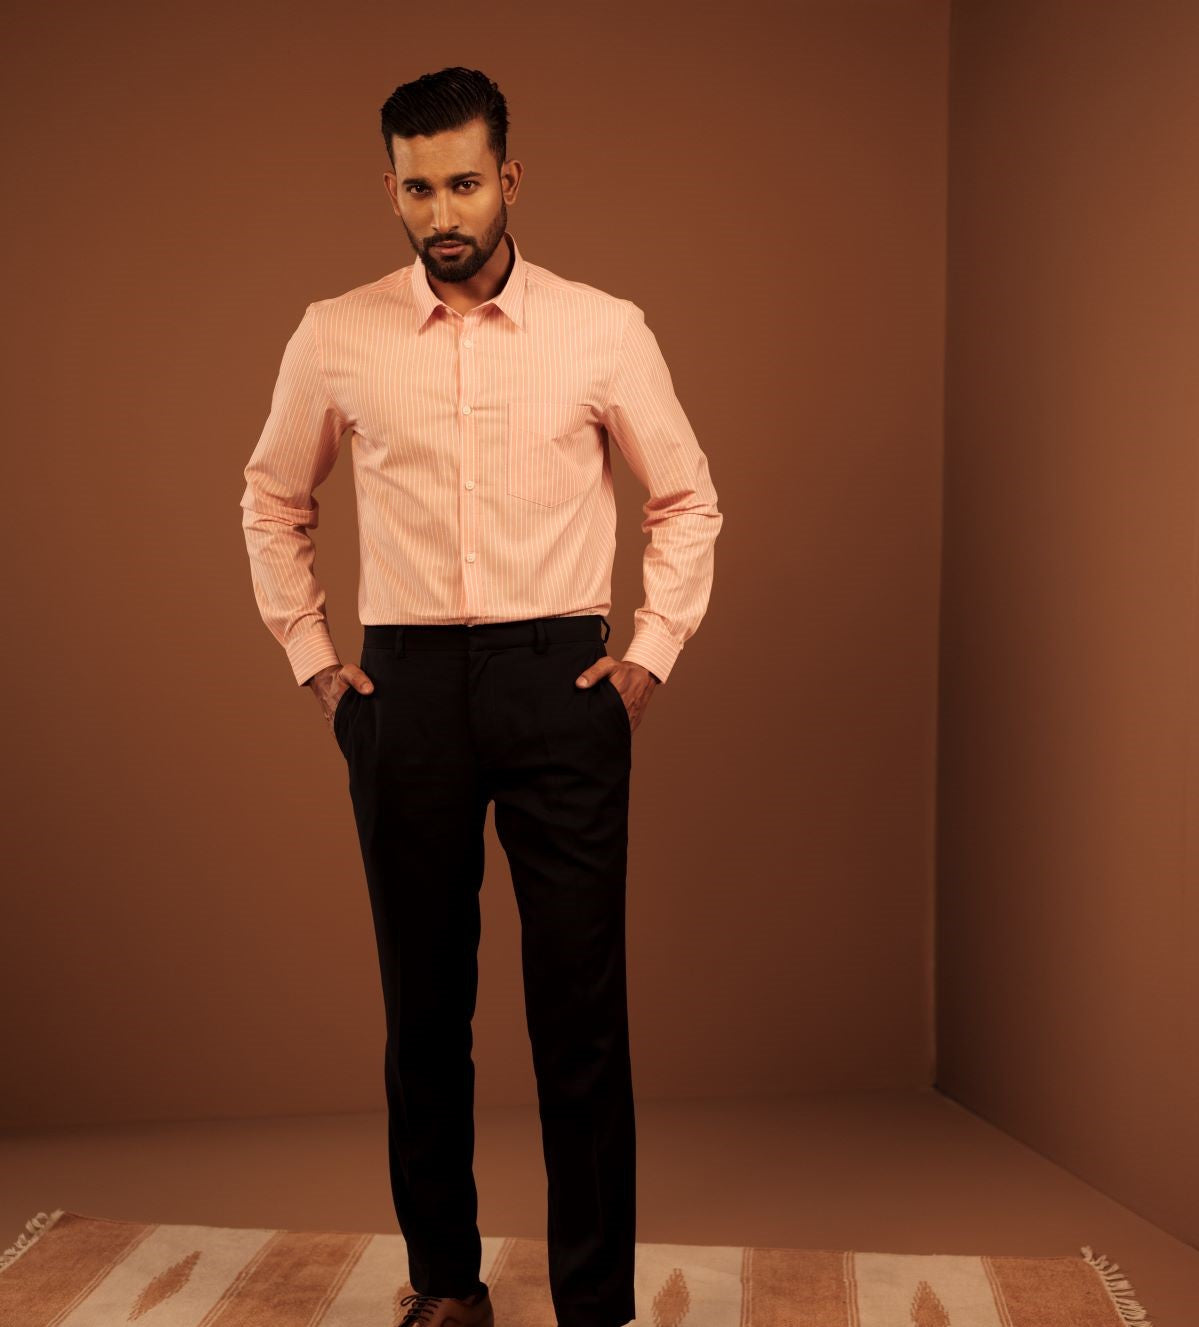 klubhaus bd spring summer eid collection premioum formal shirt collection best price online buy Shirts Best Men collection Number one lifestyle retailer in Bangladesh ‎Casual ‎Ethnic ‎Executive online clothing formal 